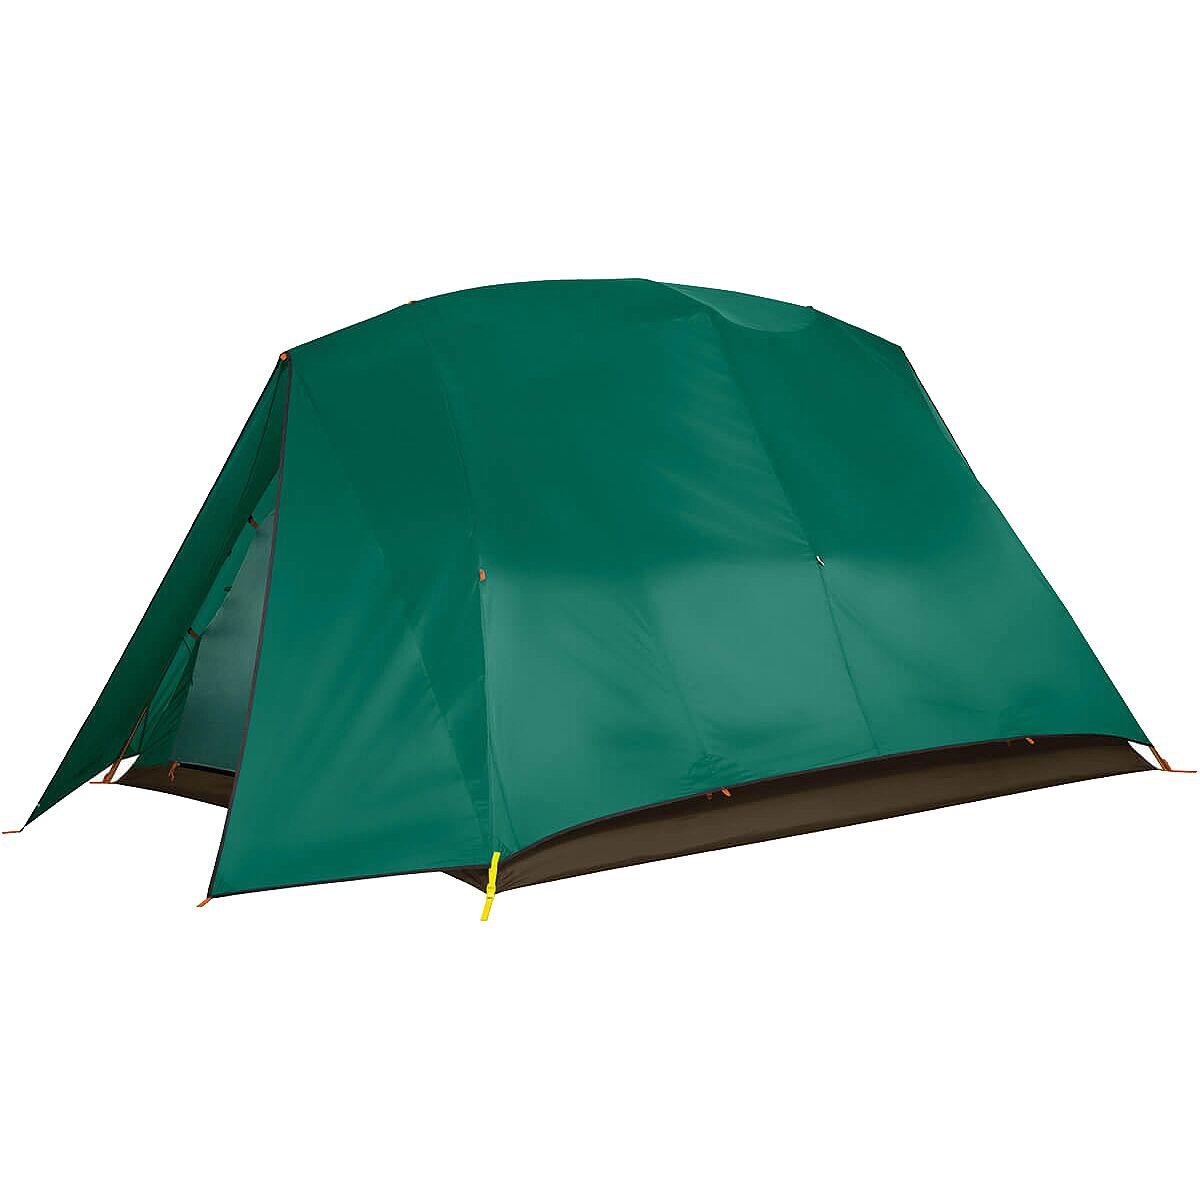 Eureka Timberline SQ Outfitter 6 Tent: 6-Person 3-Season